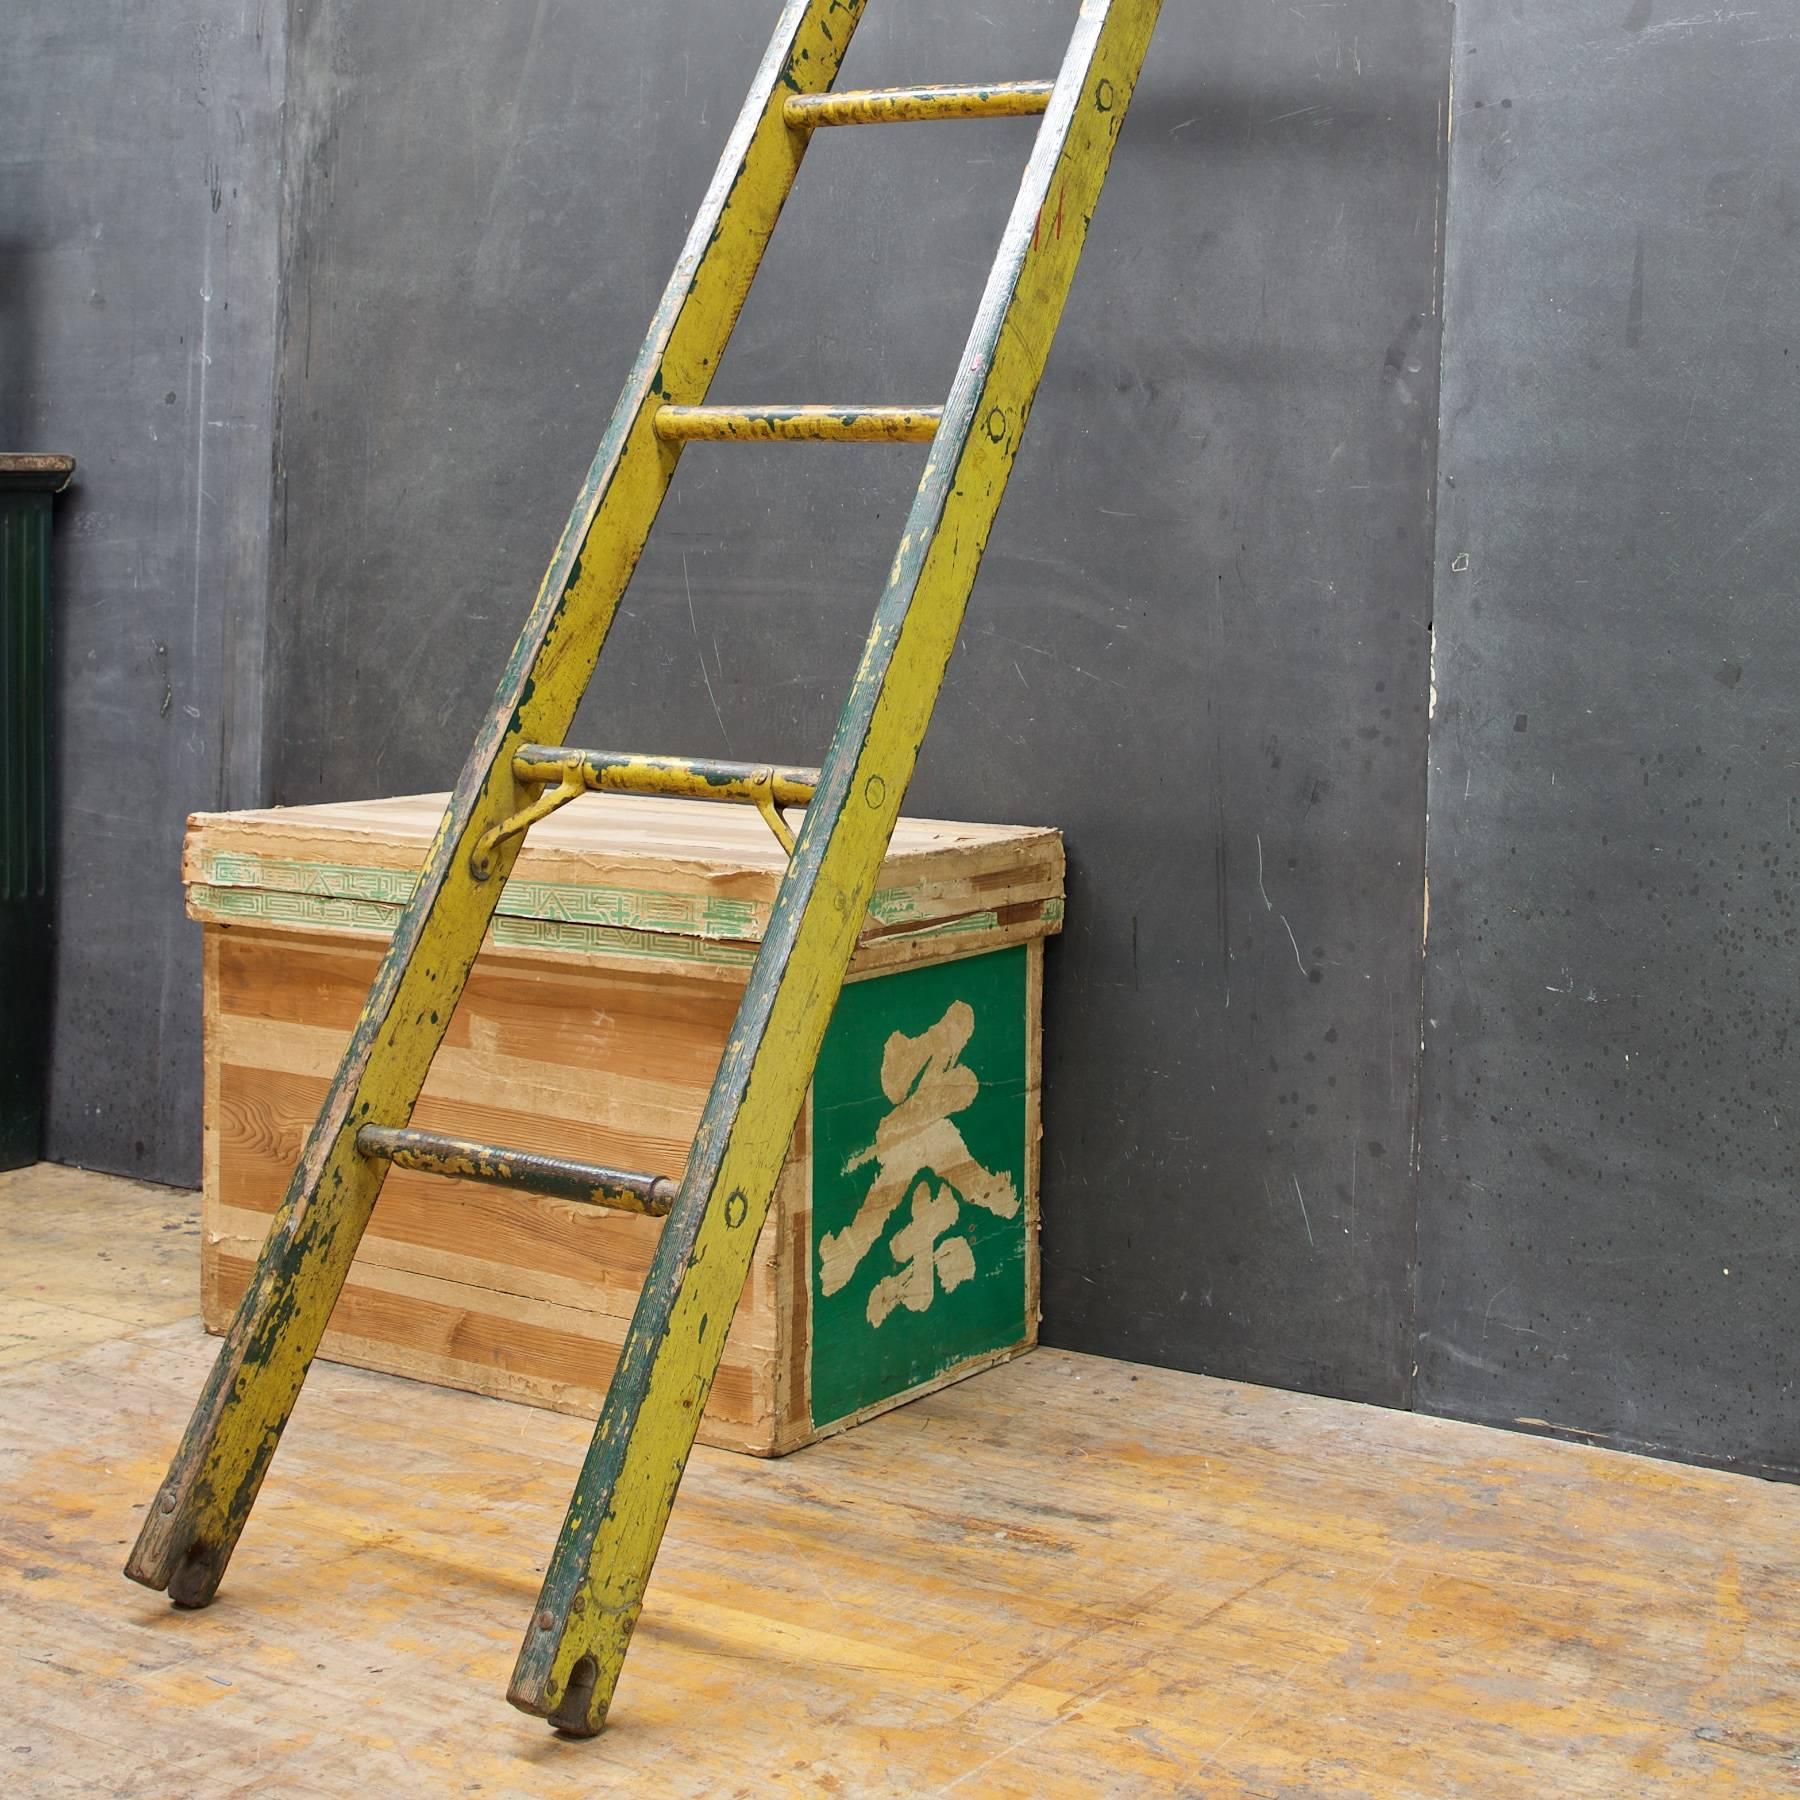 Rare antique Baltimore city enameled yellow early century lamplighters wooden ladder, with yellow, white patina, a few metal reinforcement details, forked ends were used for stacking additional ladder segments. 

Measures: Top W 12¼ x Bottom W 15¼